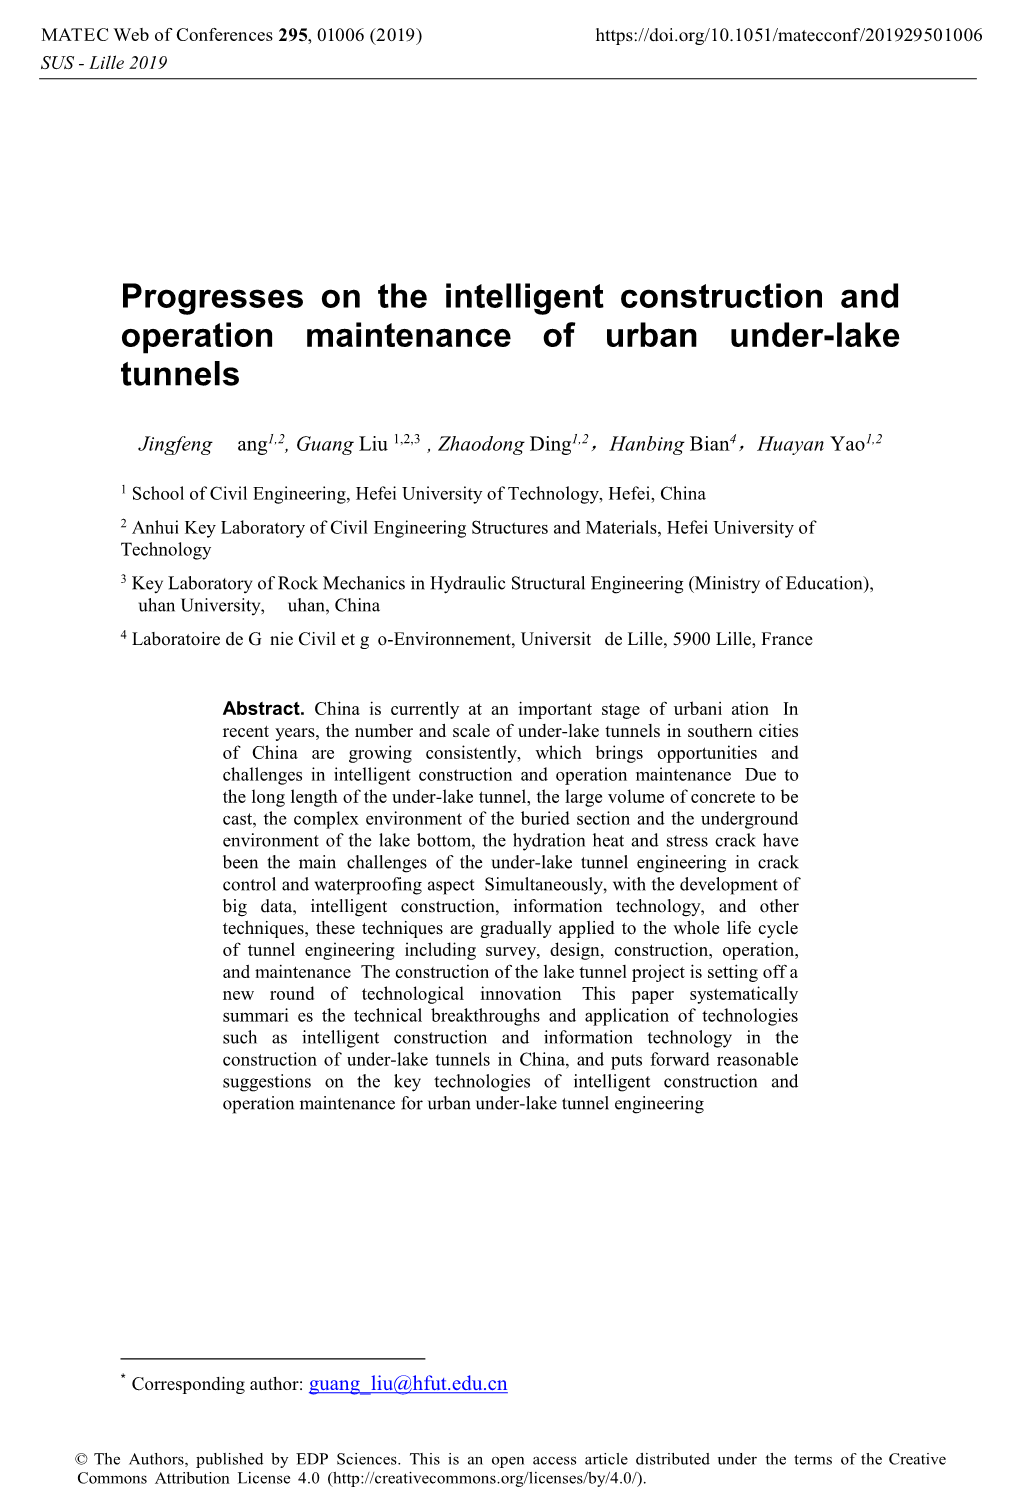 Progresses on the Intelligent Construction and Operation Maintenance of Urban Under-Lake Tunnels